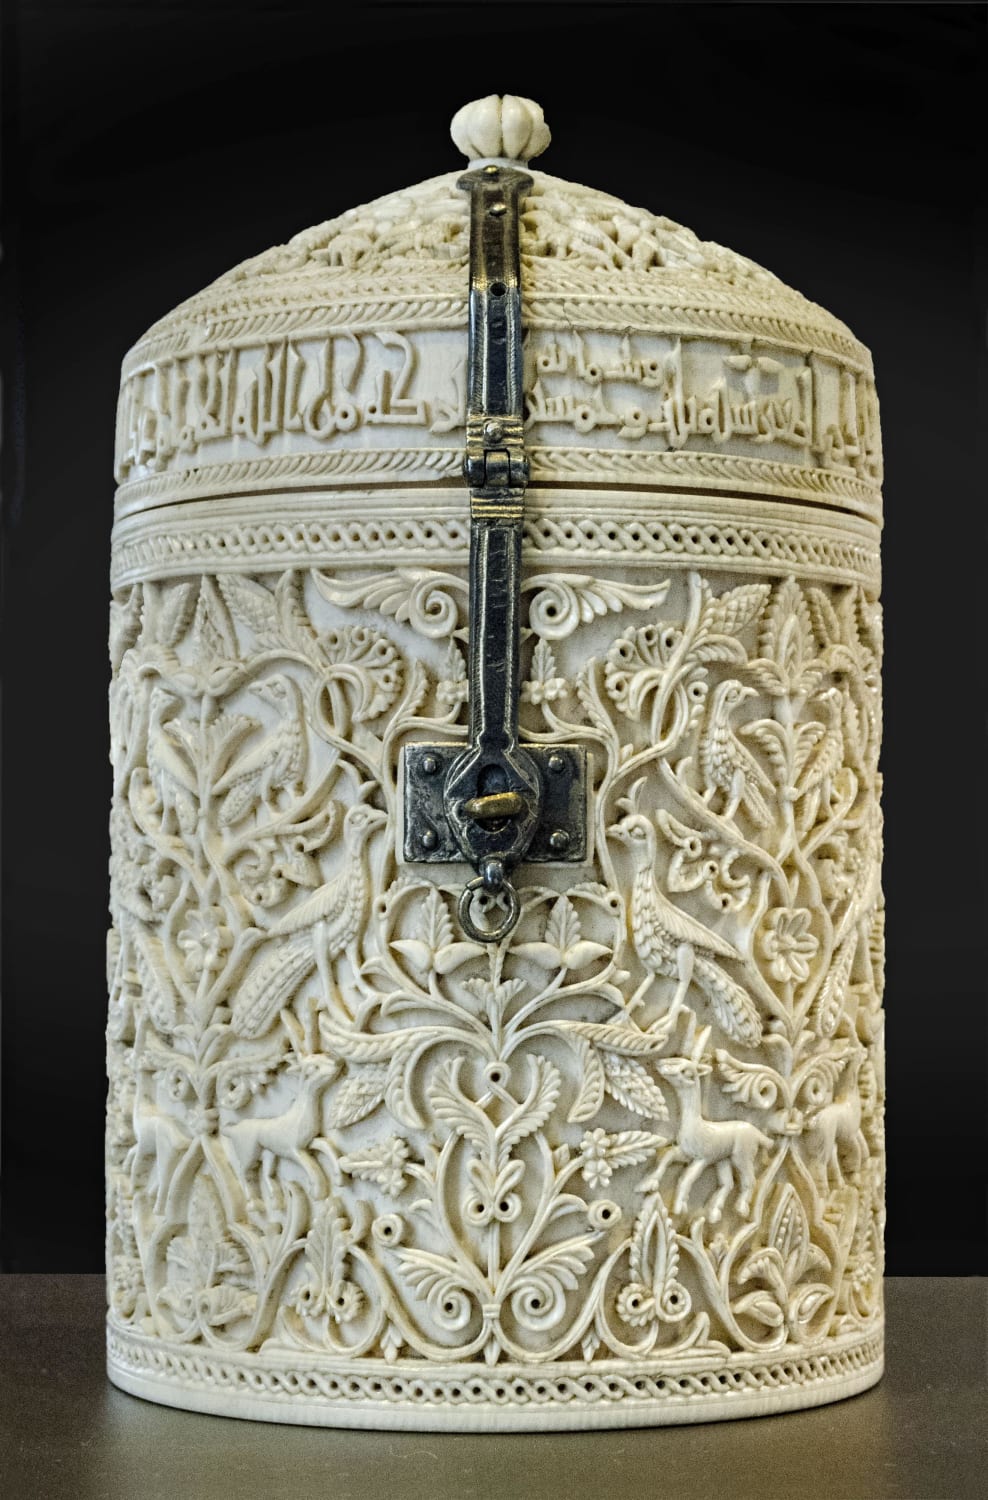 The Pyxis of Zamora is a carved ivory casket commissioned by the Umayyad caliph Al-Hakam II in 964 CE for his concubine Subh. It was made in the Madinat al-Zahra, capital of the Caliphate of Córdoba, and is now on display at the National Archaeological Museum of Spain